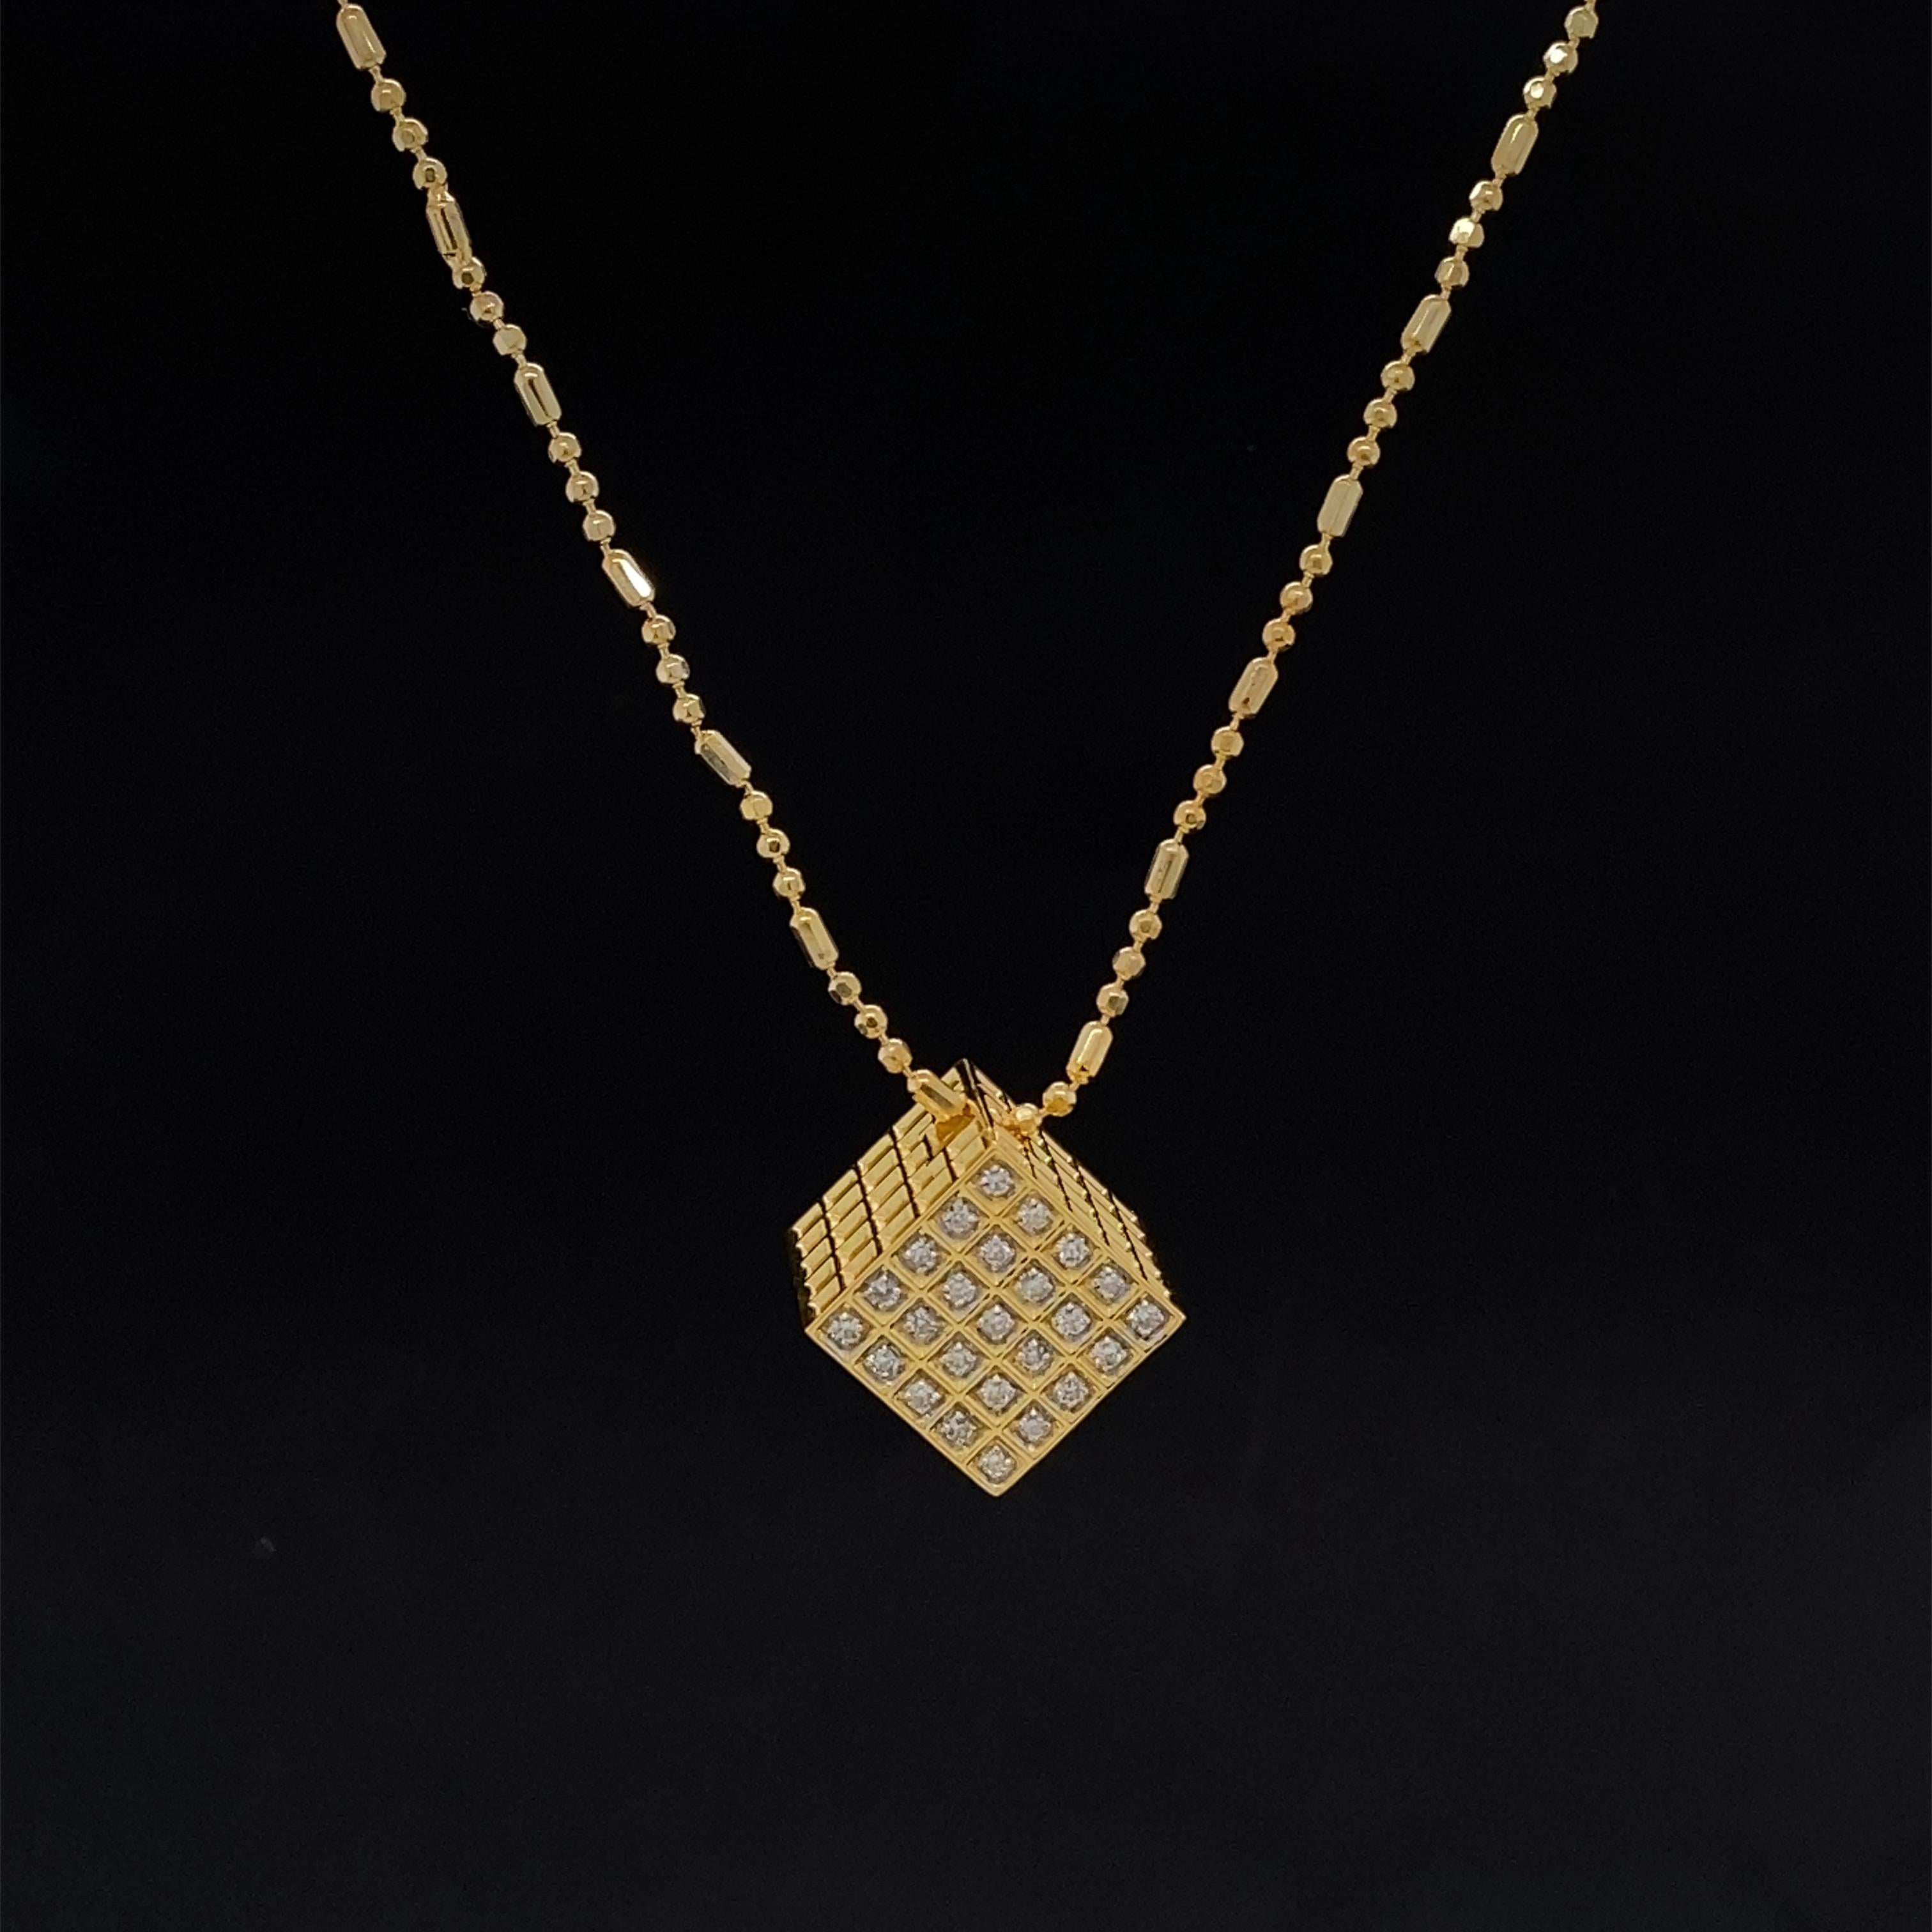 3D Solid Cube Diamond Pendant in 18k Solid Gold For Sale 6